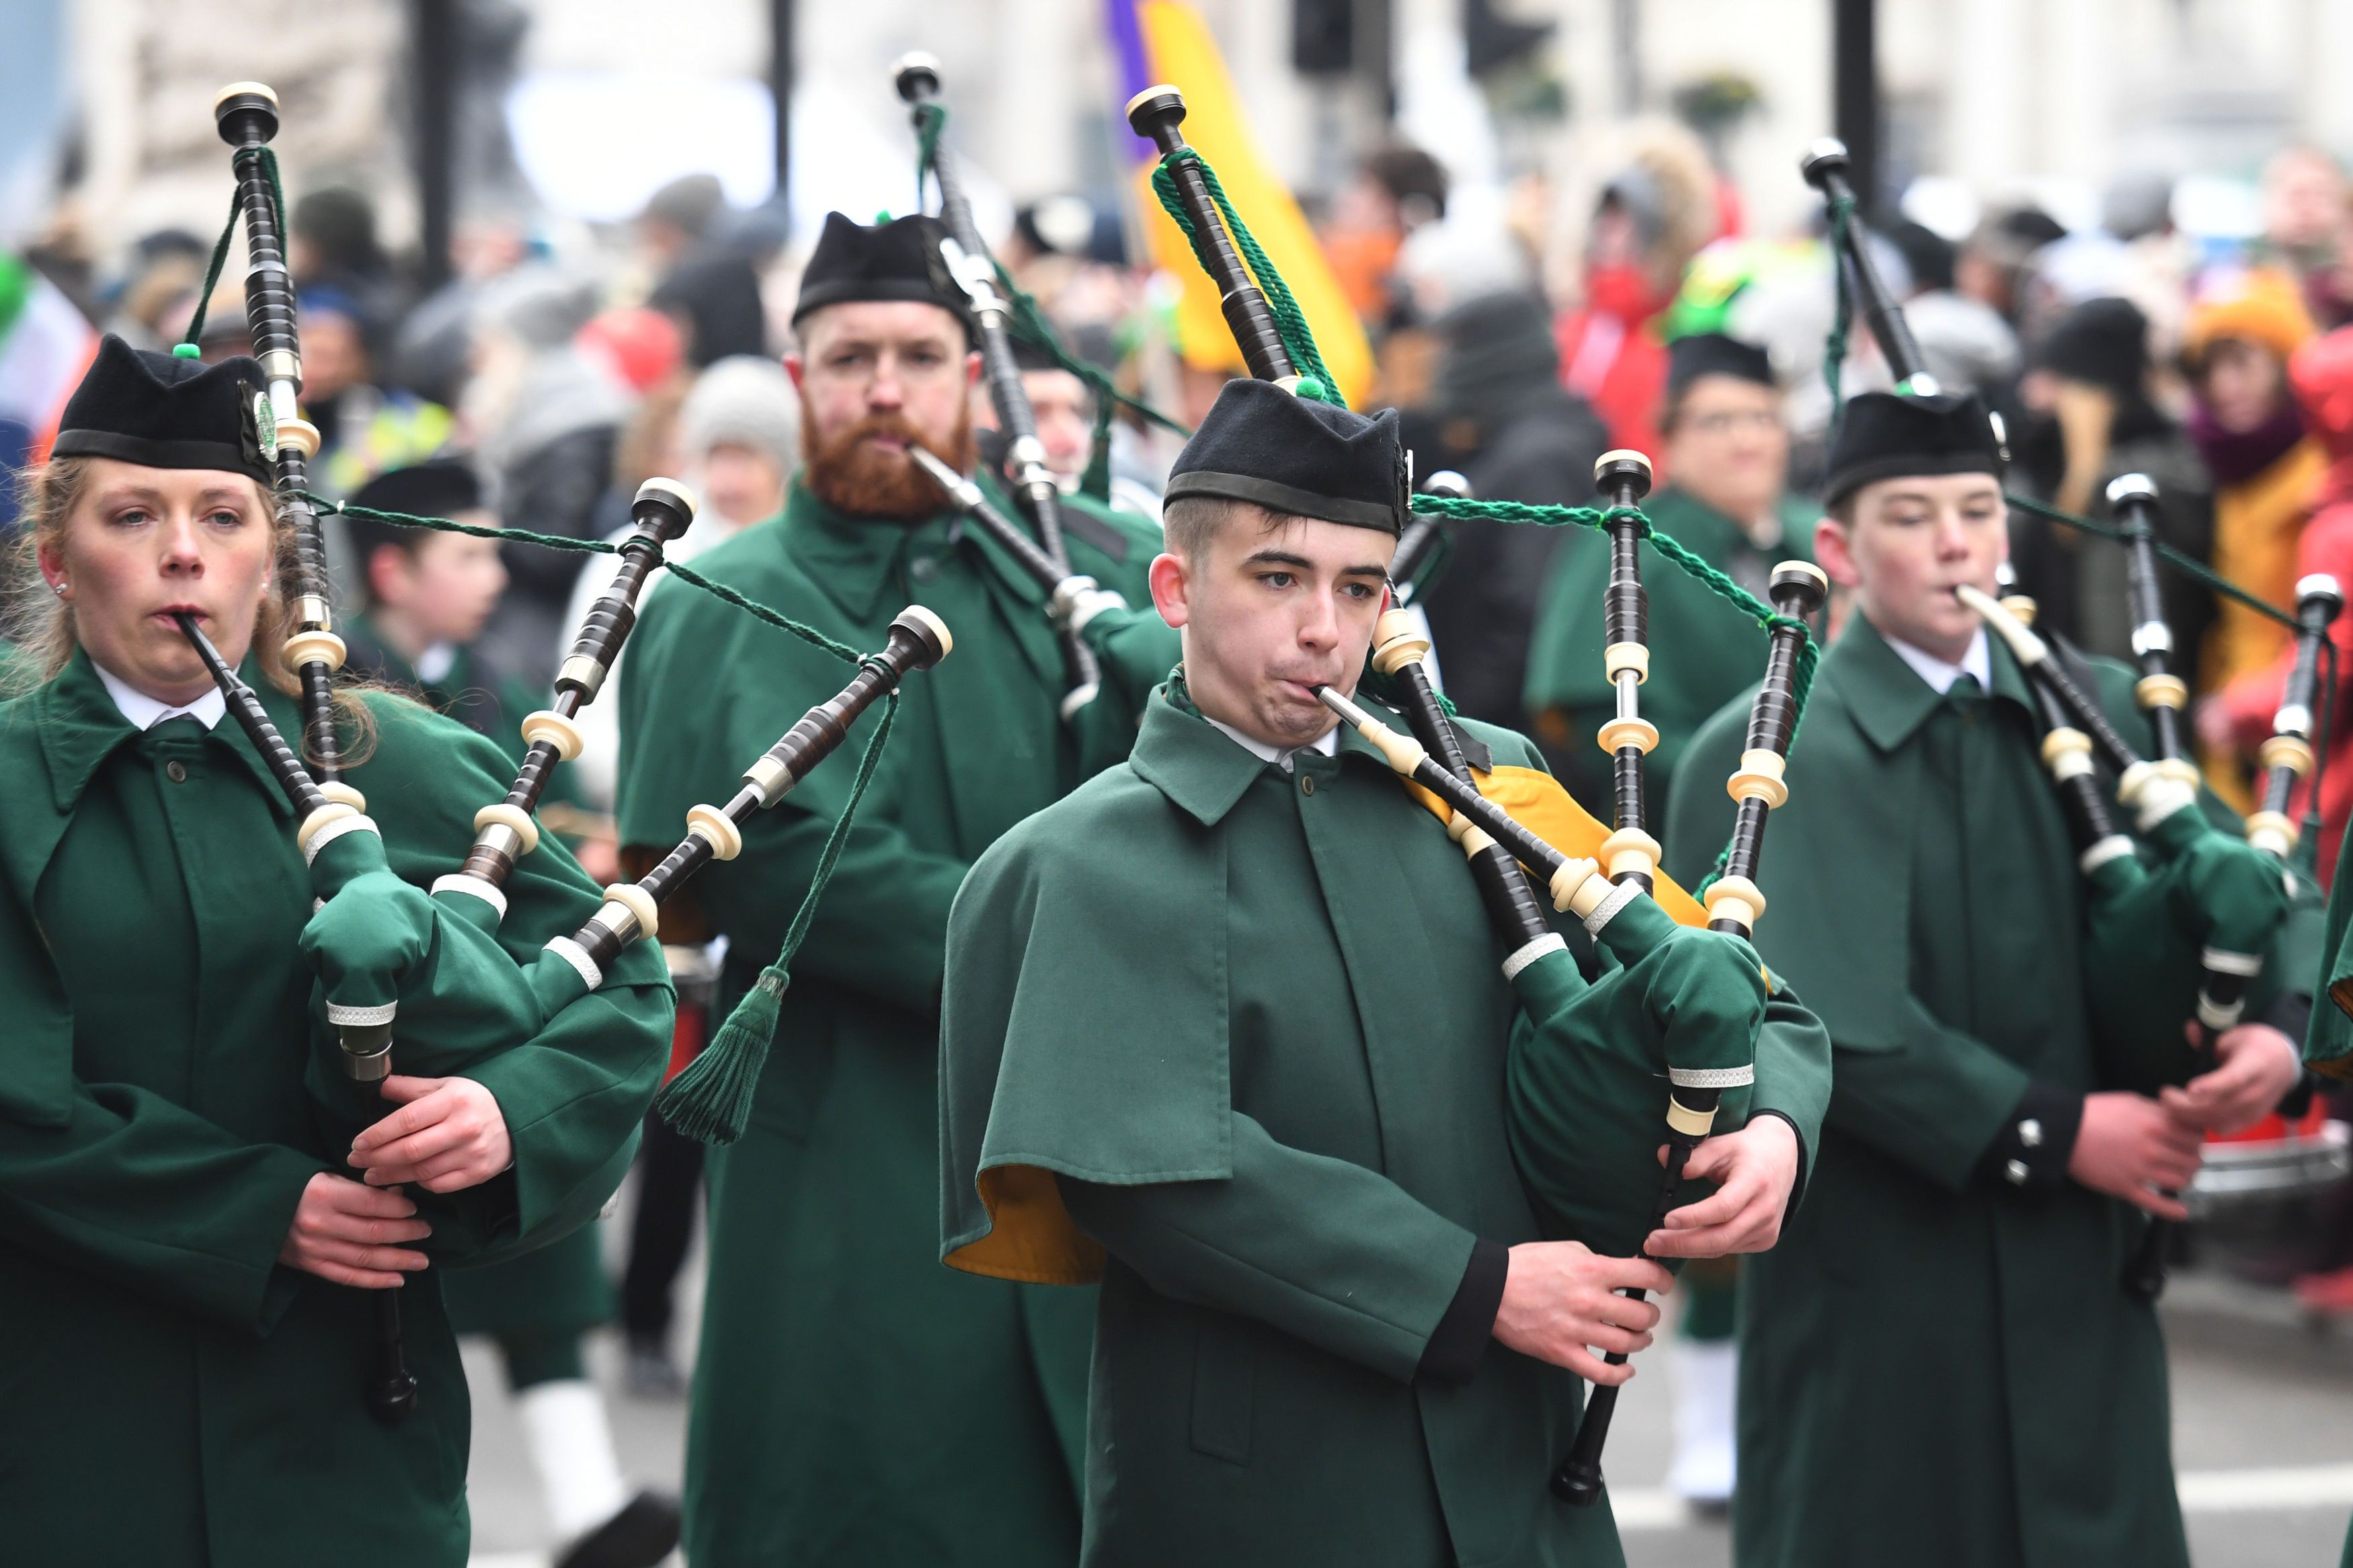 The 10 biggest ST. PATRICK'S DAY parades around the world